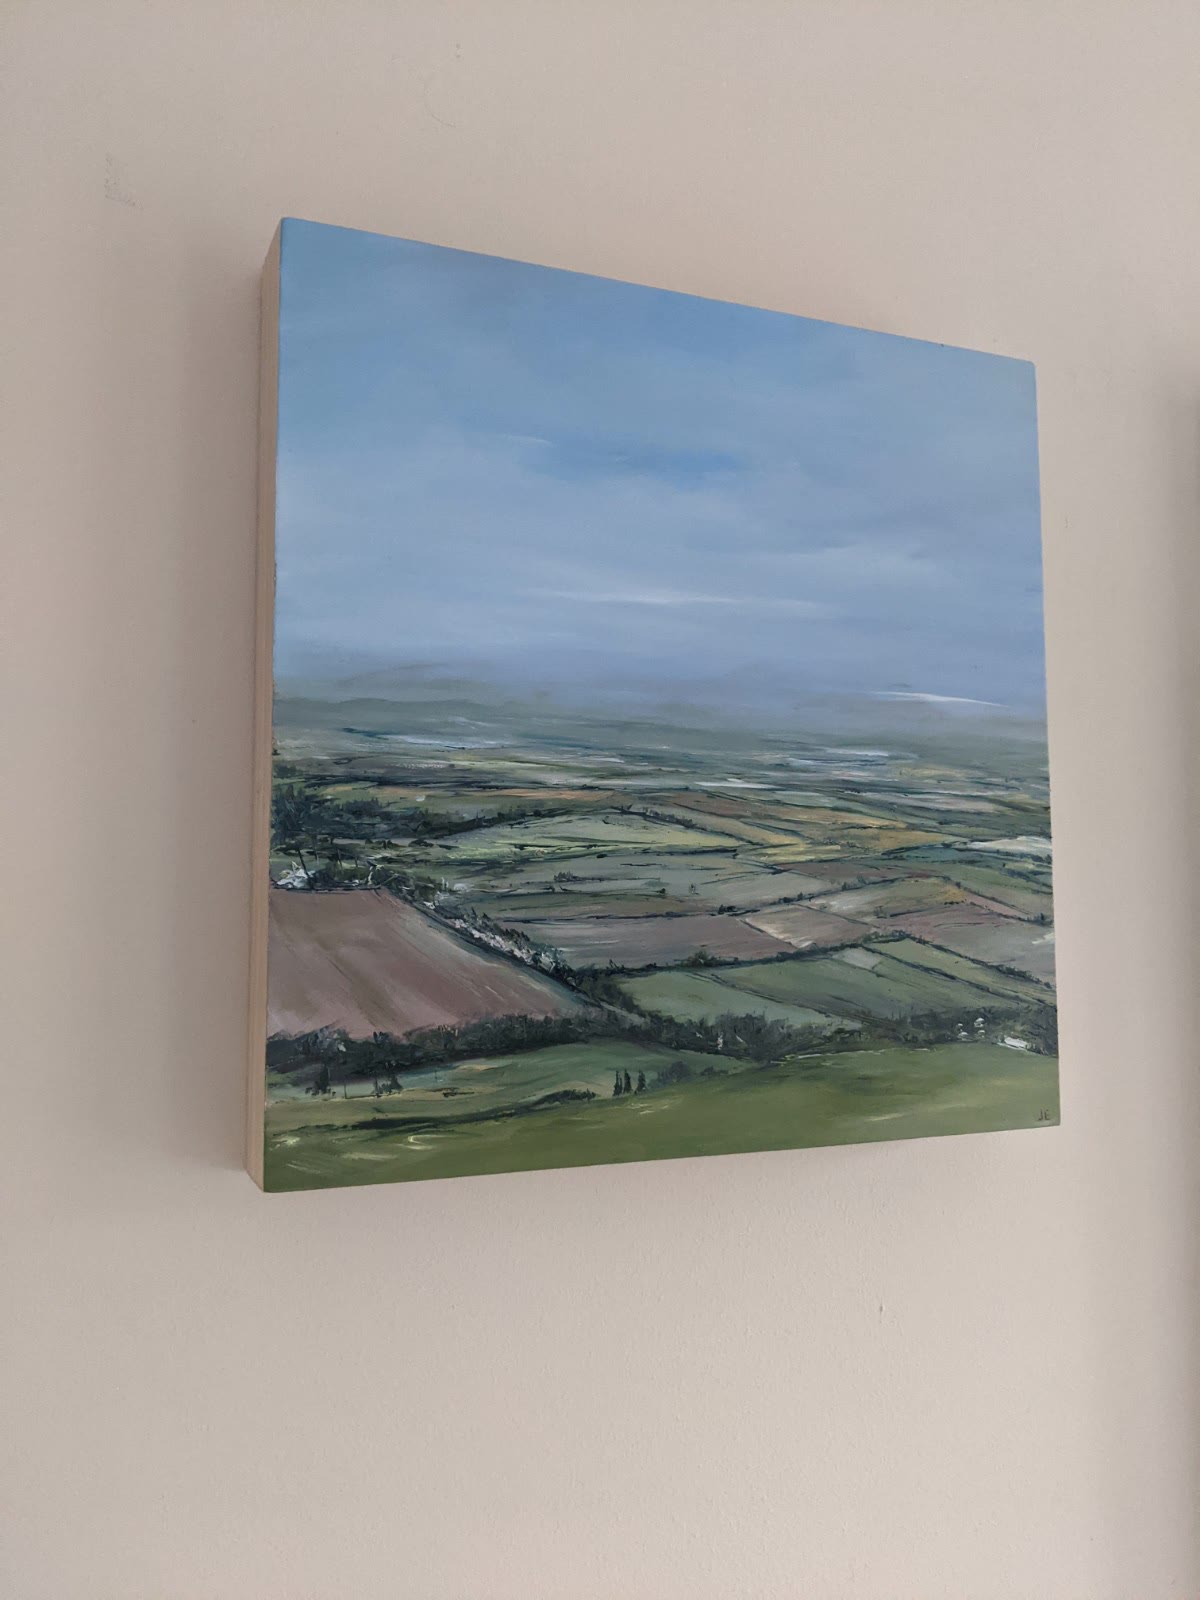 Coombe Hill, Buckinghamshire View oil painting on cradled wood on wall, by Jo Earl